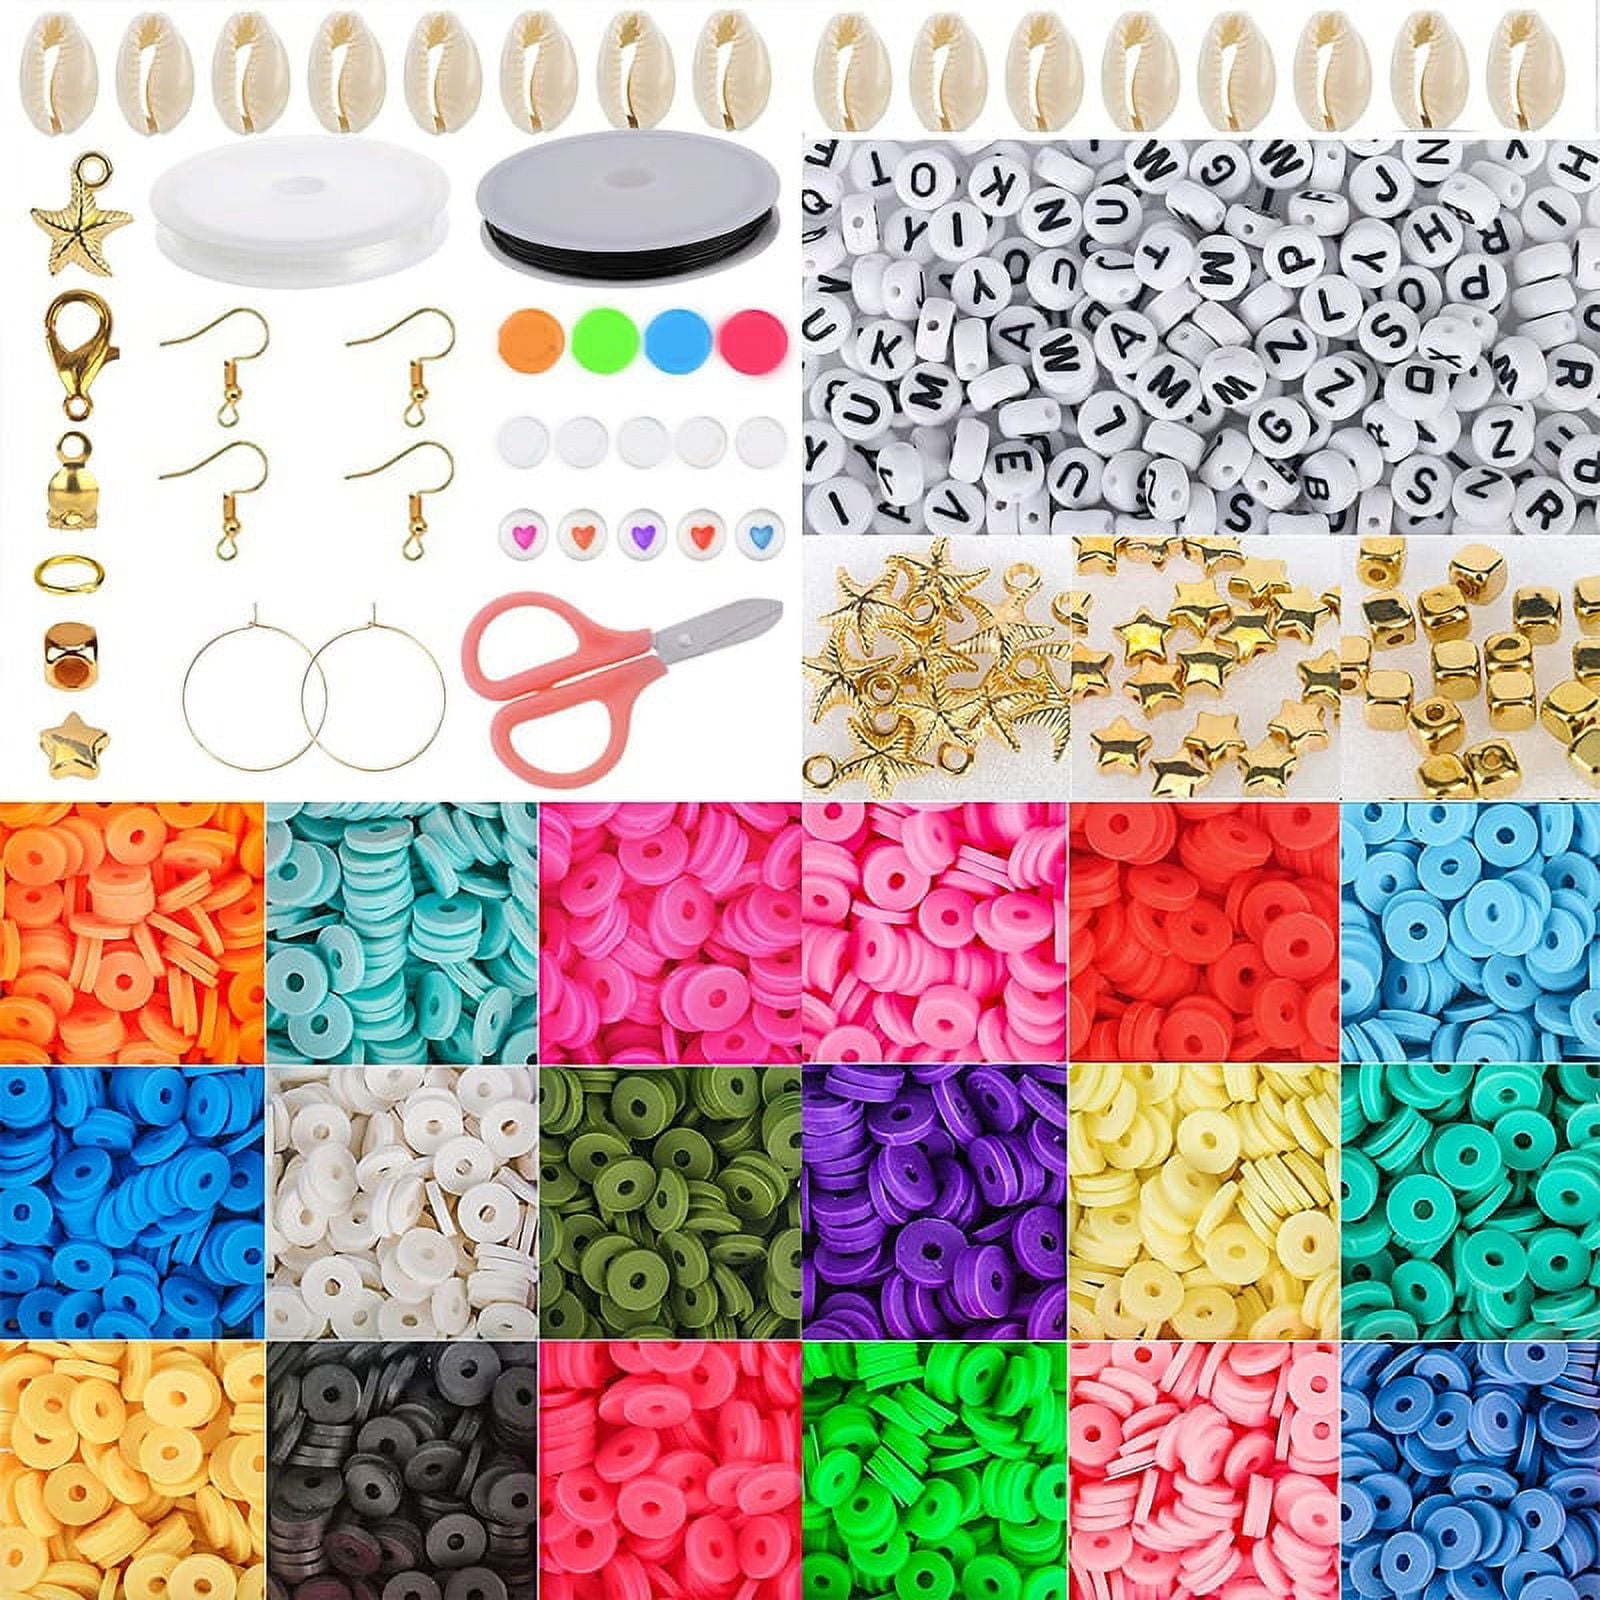  4100 Pcs Clay Beads Kit, Beads for Jewelry Making, Flat Polymer Clay  Beads with Alloy Beads, Spacer & Crystal Line for Jewelry Making, Bracelets  Necklace Earring DIY Craft Kit (6mm, 10